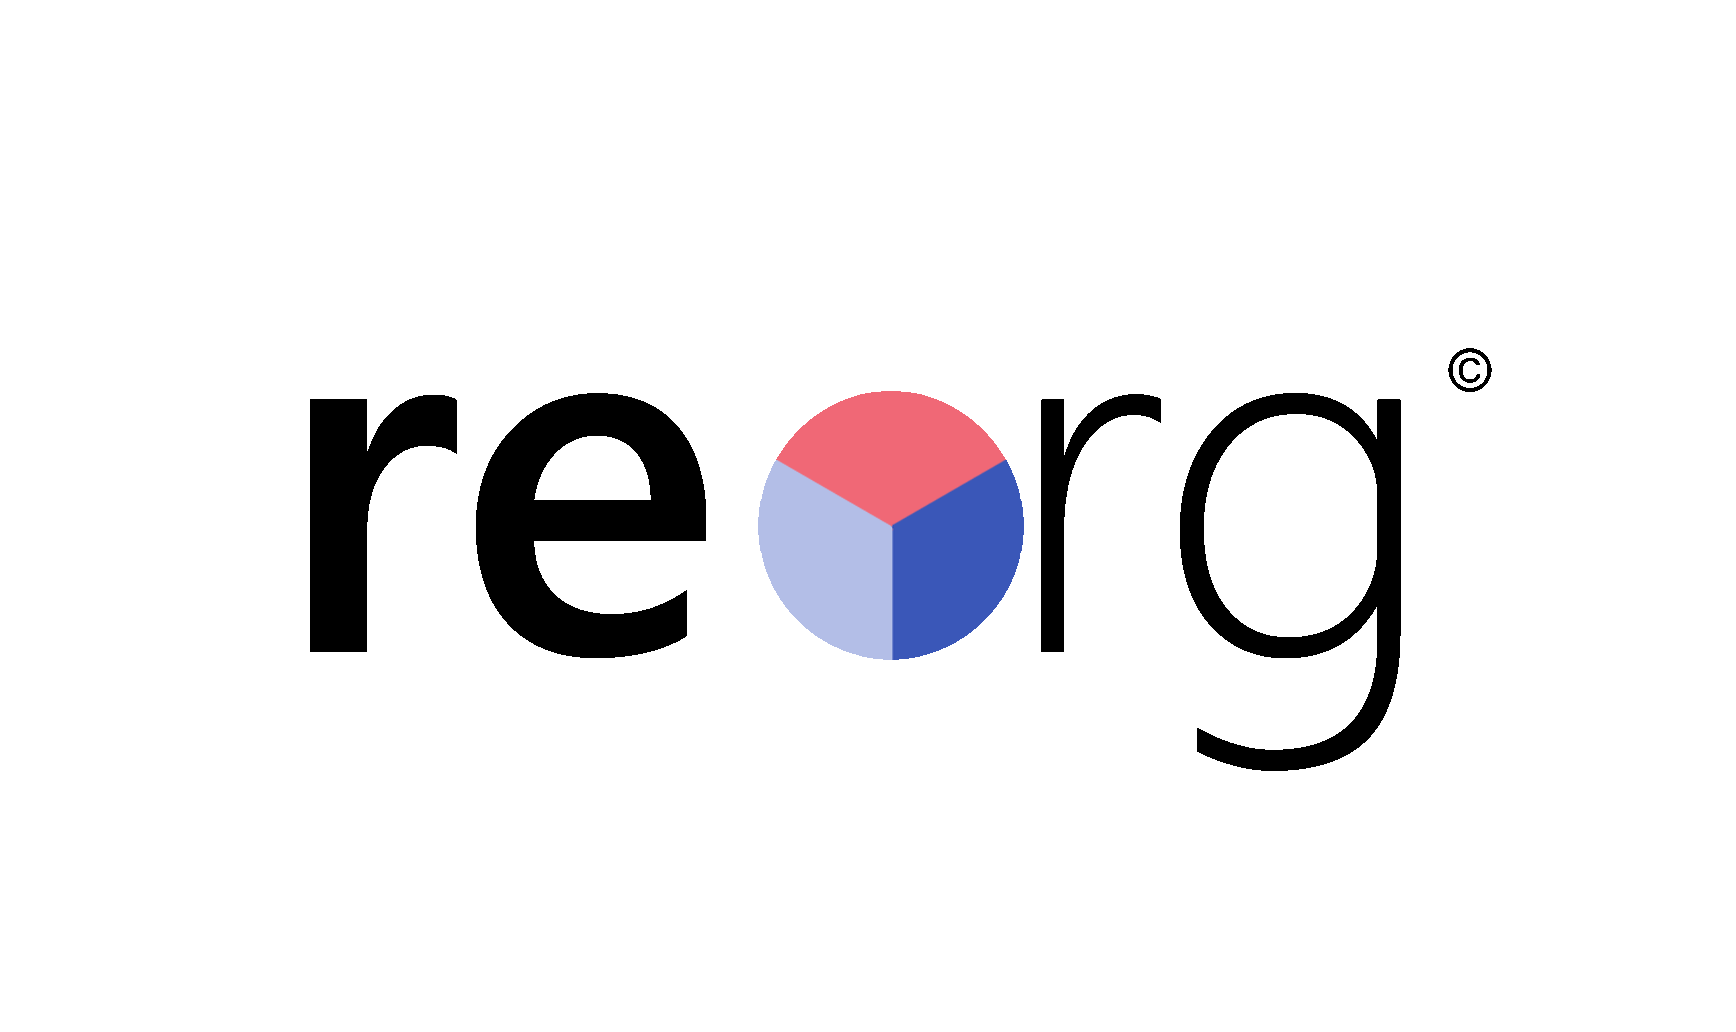 reorg logo - reversed design of orgview with the "o" being pie chart